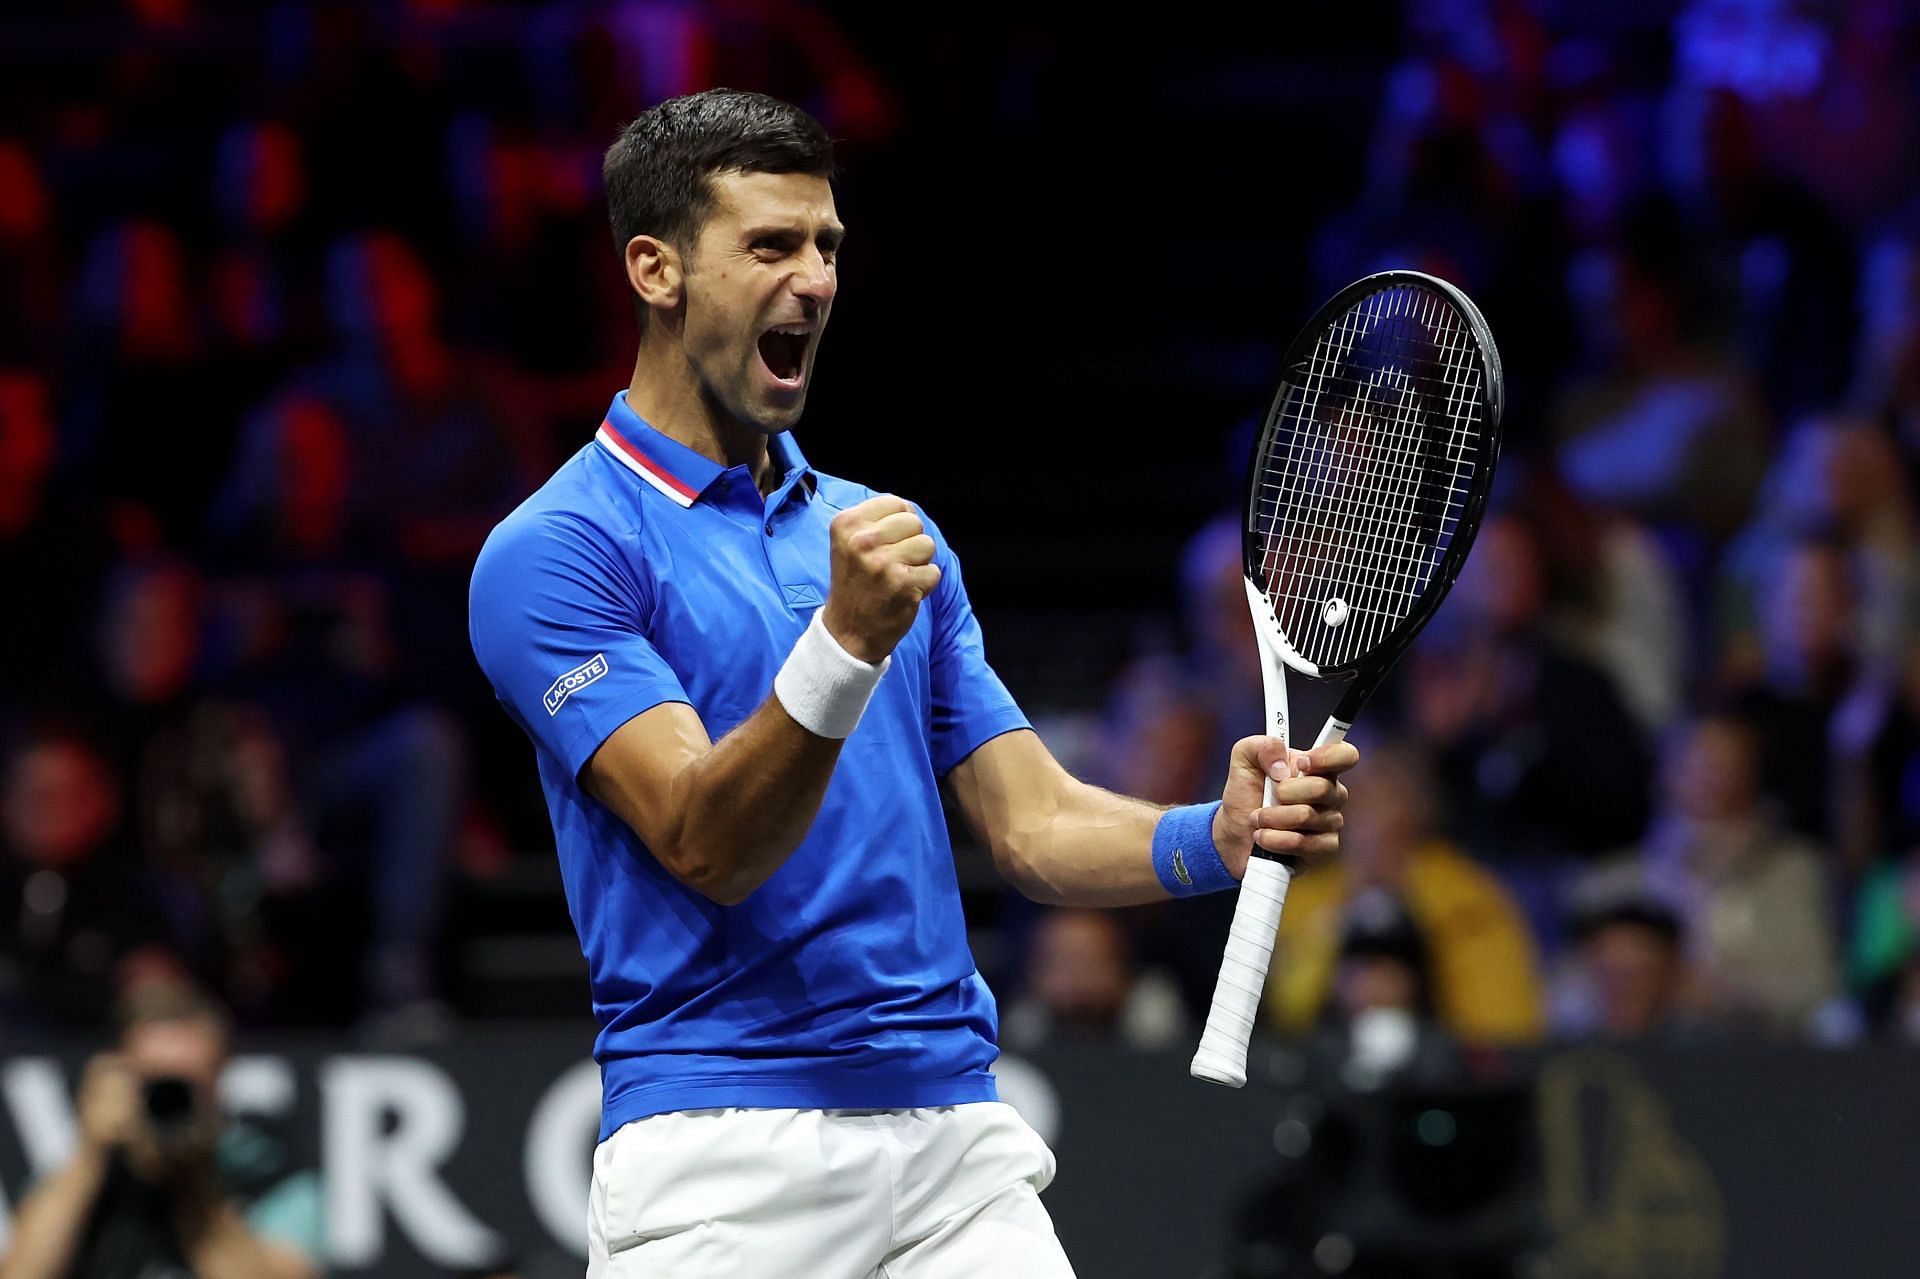 Novak Djokovic is fifth on the list of the highest number of titles among the men.